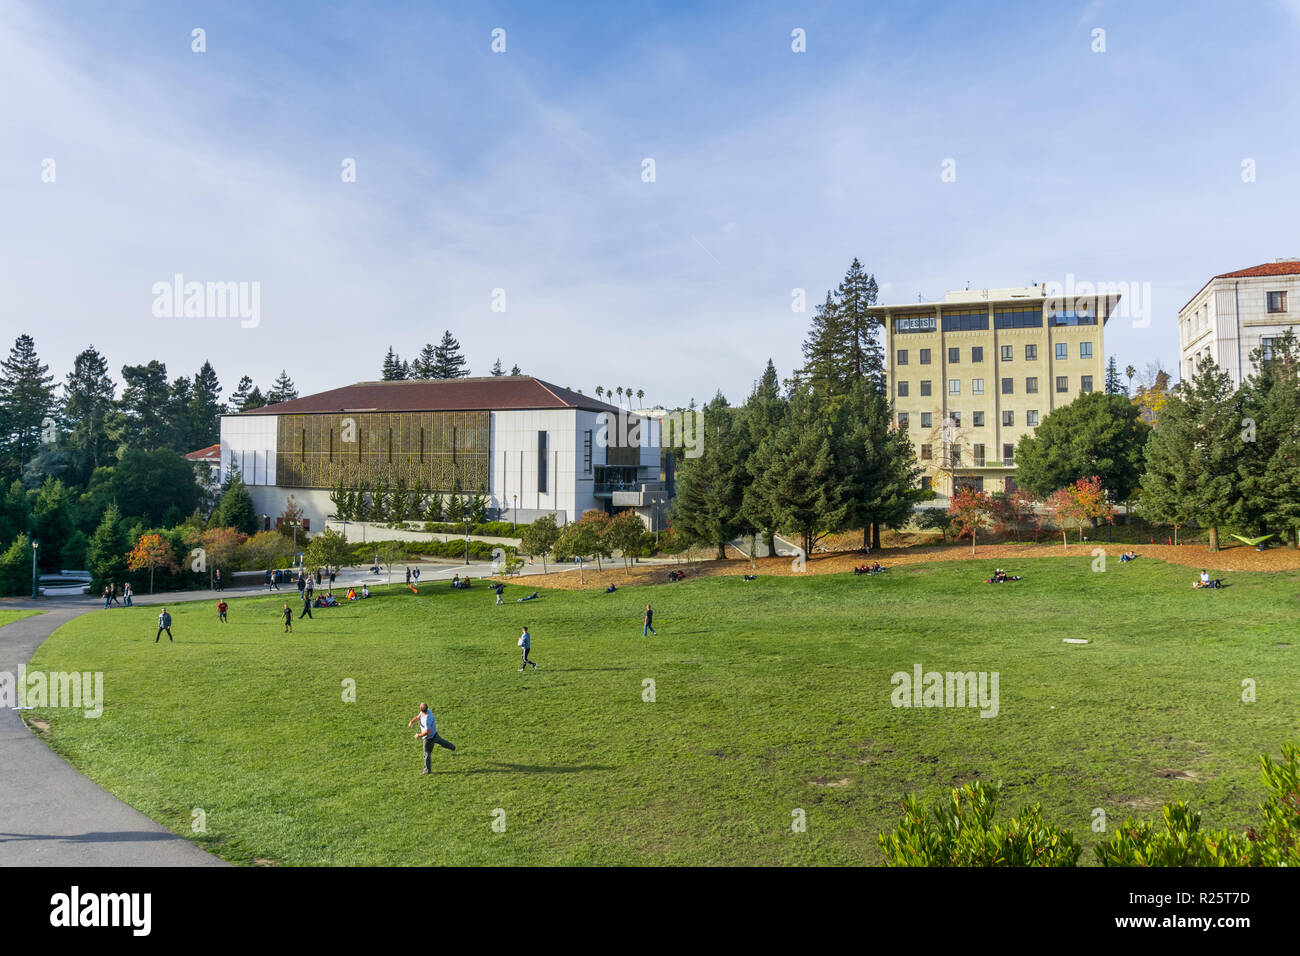 November 19, 2017 Berkeley/CA/USA - People playing and lounging on a green meadow in the university's campus on a sunny day Stock Photo